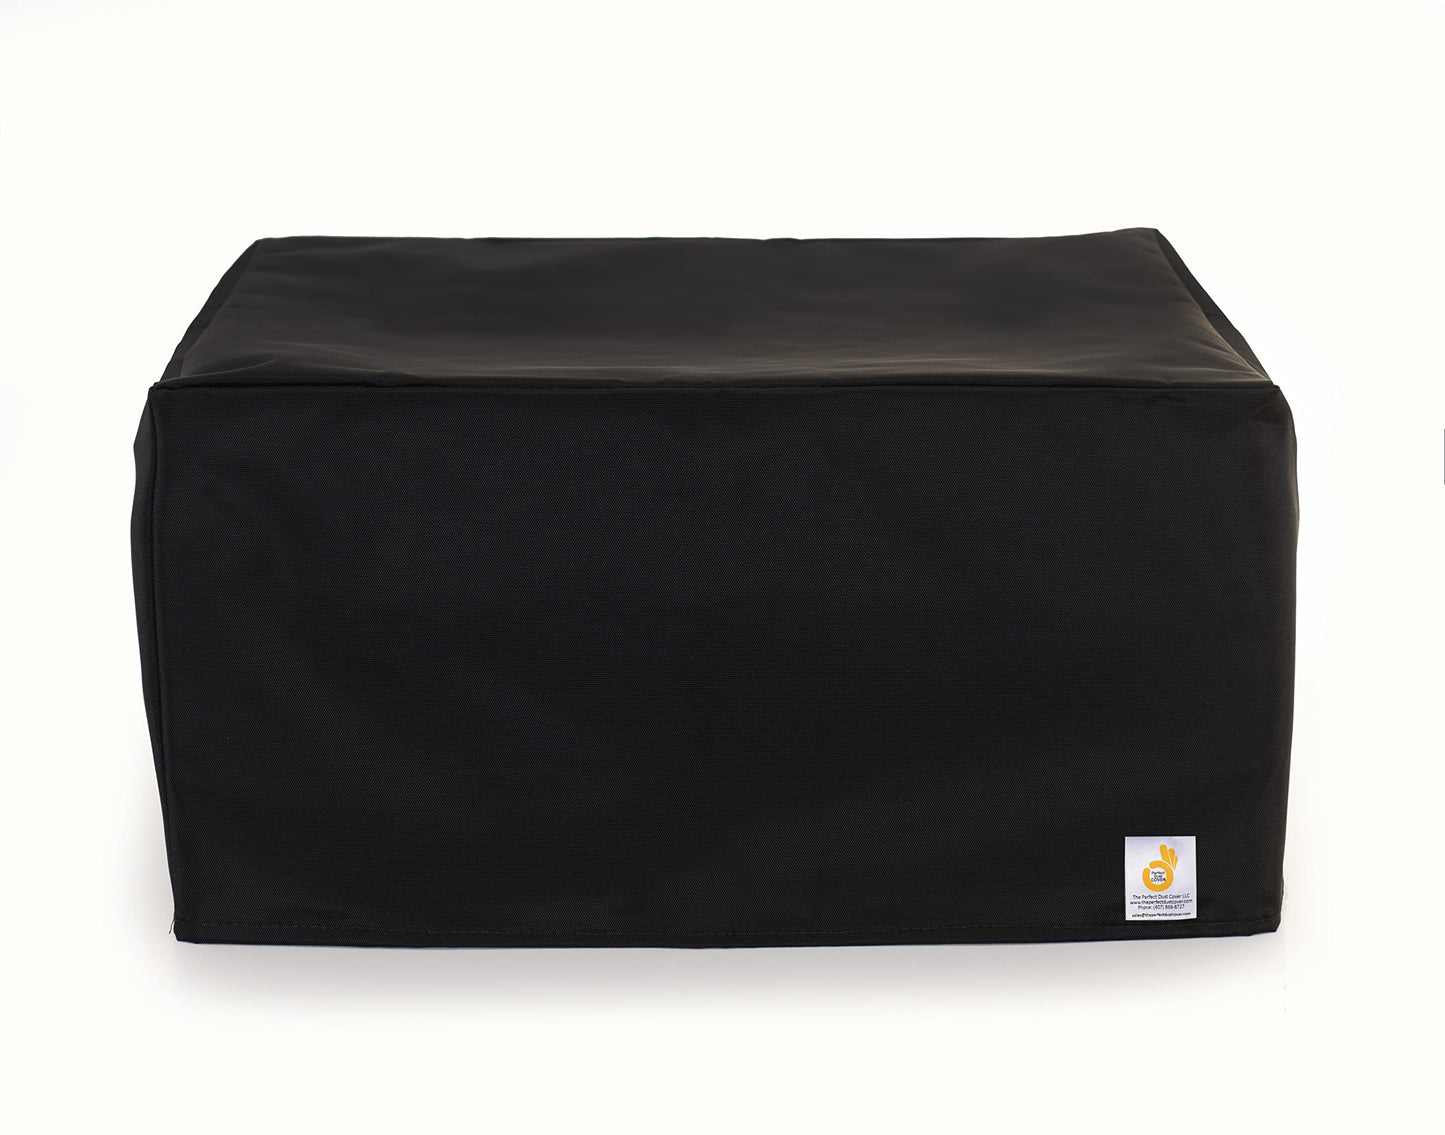 The Perfect Dust Cover, Anti Static Cover for HP Laserjet Pro MFP M479fdn Laser Printer, Black Nylon Waterproof Cover Dimensions 16.4''W x 18.6''D x 15.4''H by The Perfect Dust Cover LLC